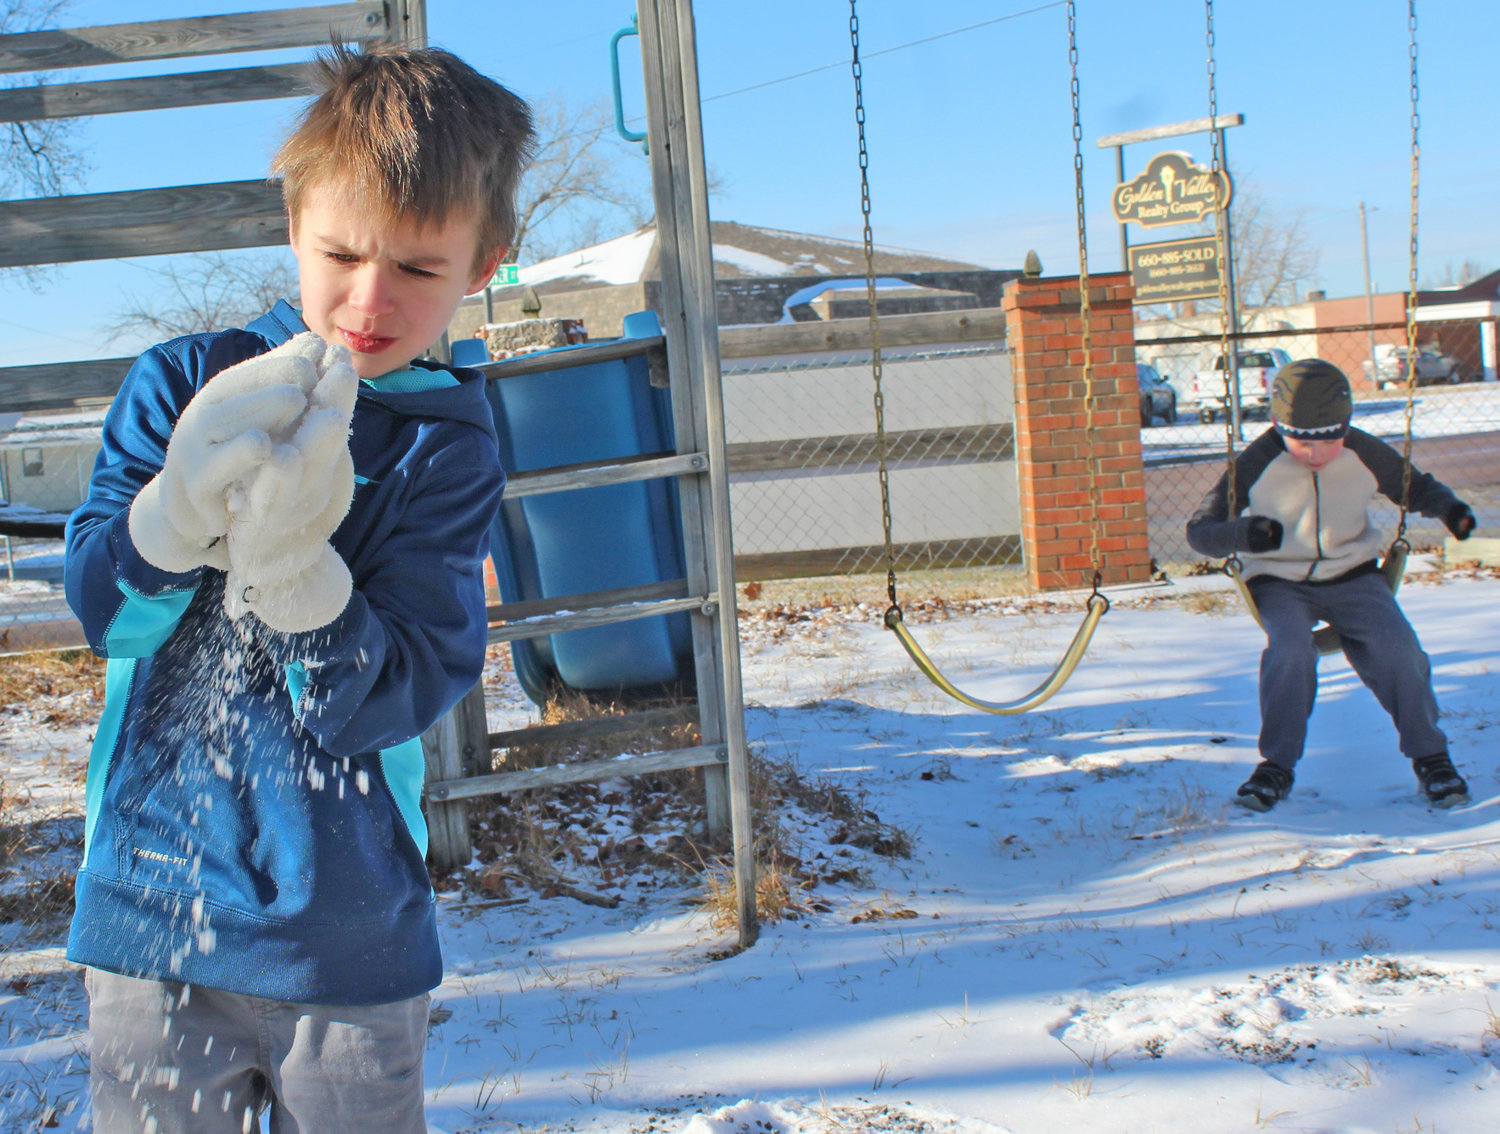 Matthew Aldridge looks a sparkles in the snow, while older
brother Noah swings, on January 6, on the playground by
the old Holy Rosary Catholic Church on 2nd Street in
Clinton.